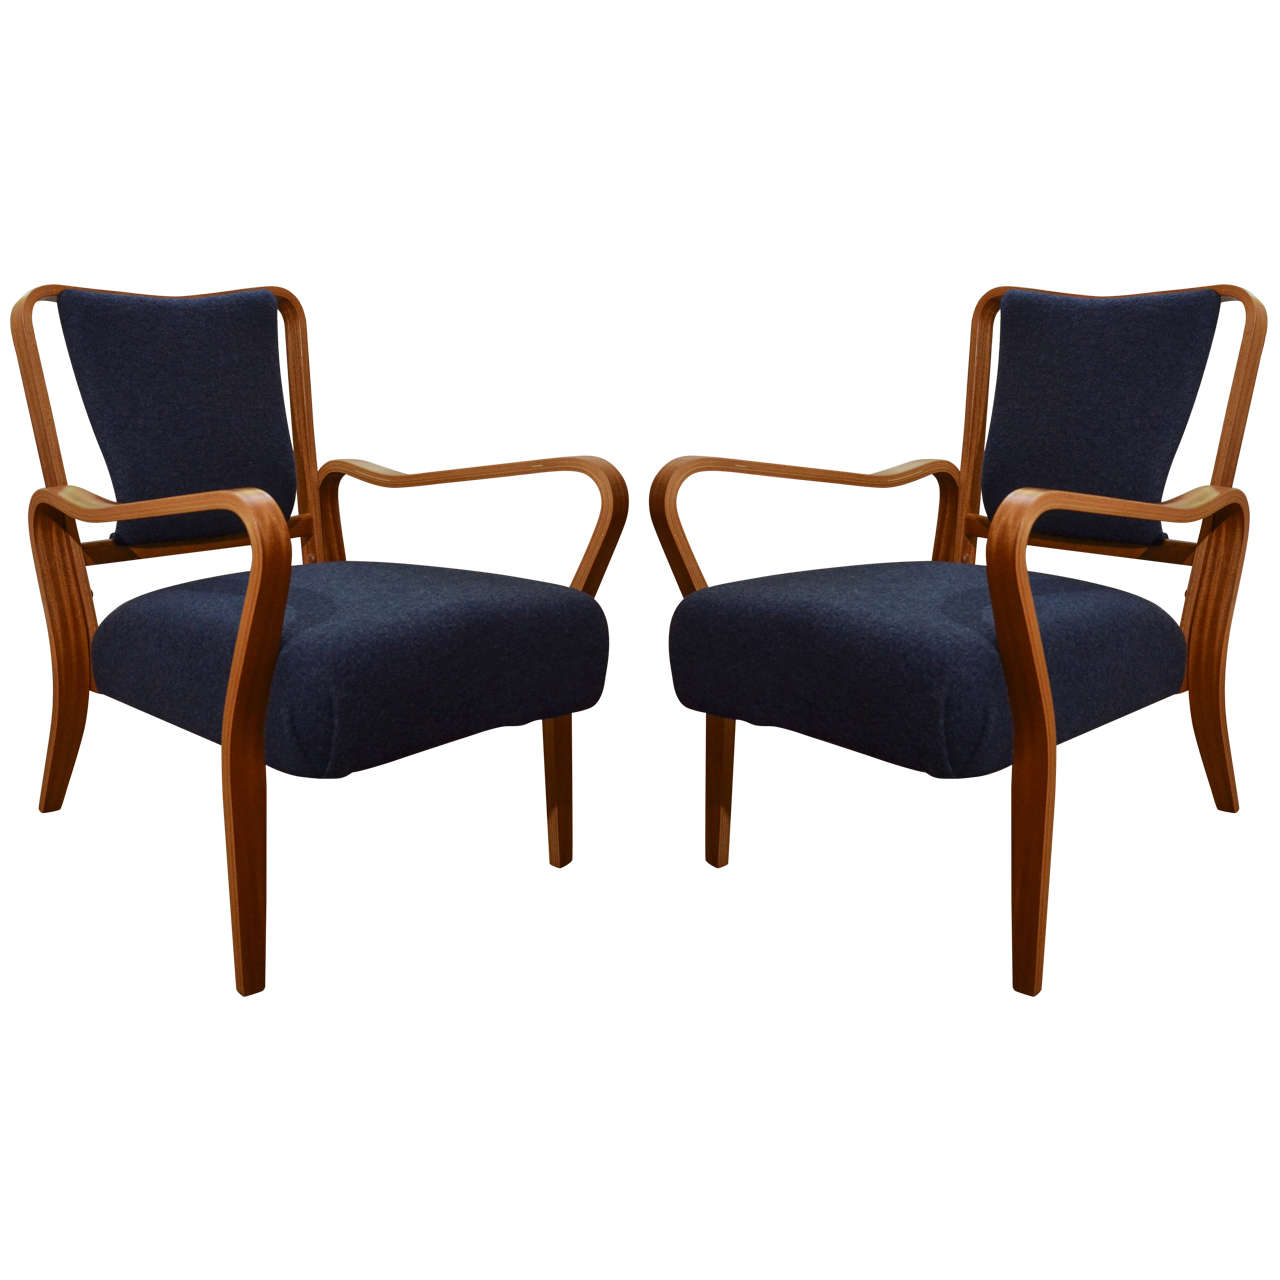 Pair of "Linden" Beech Armchairs by J.A. Jenkins